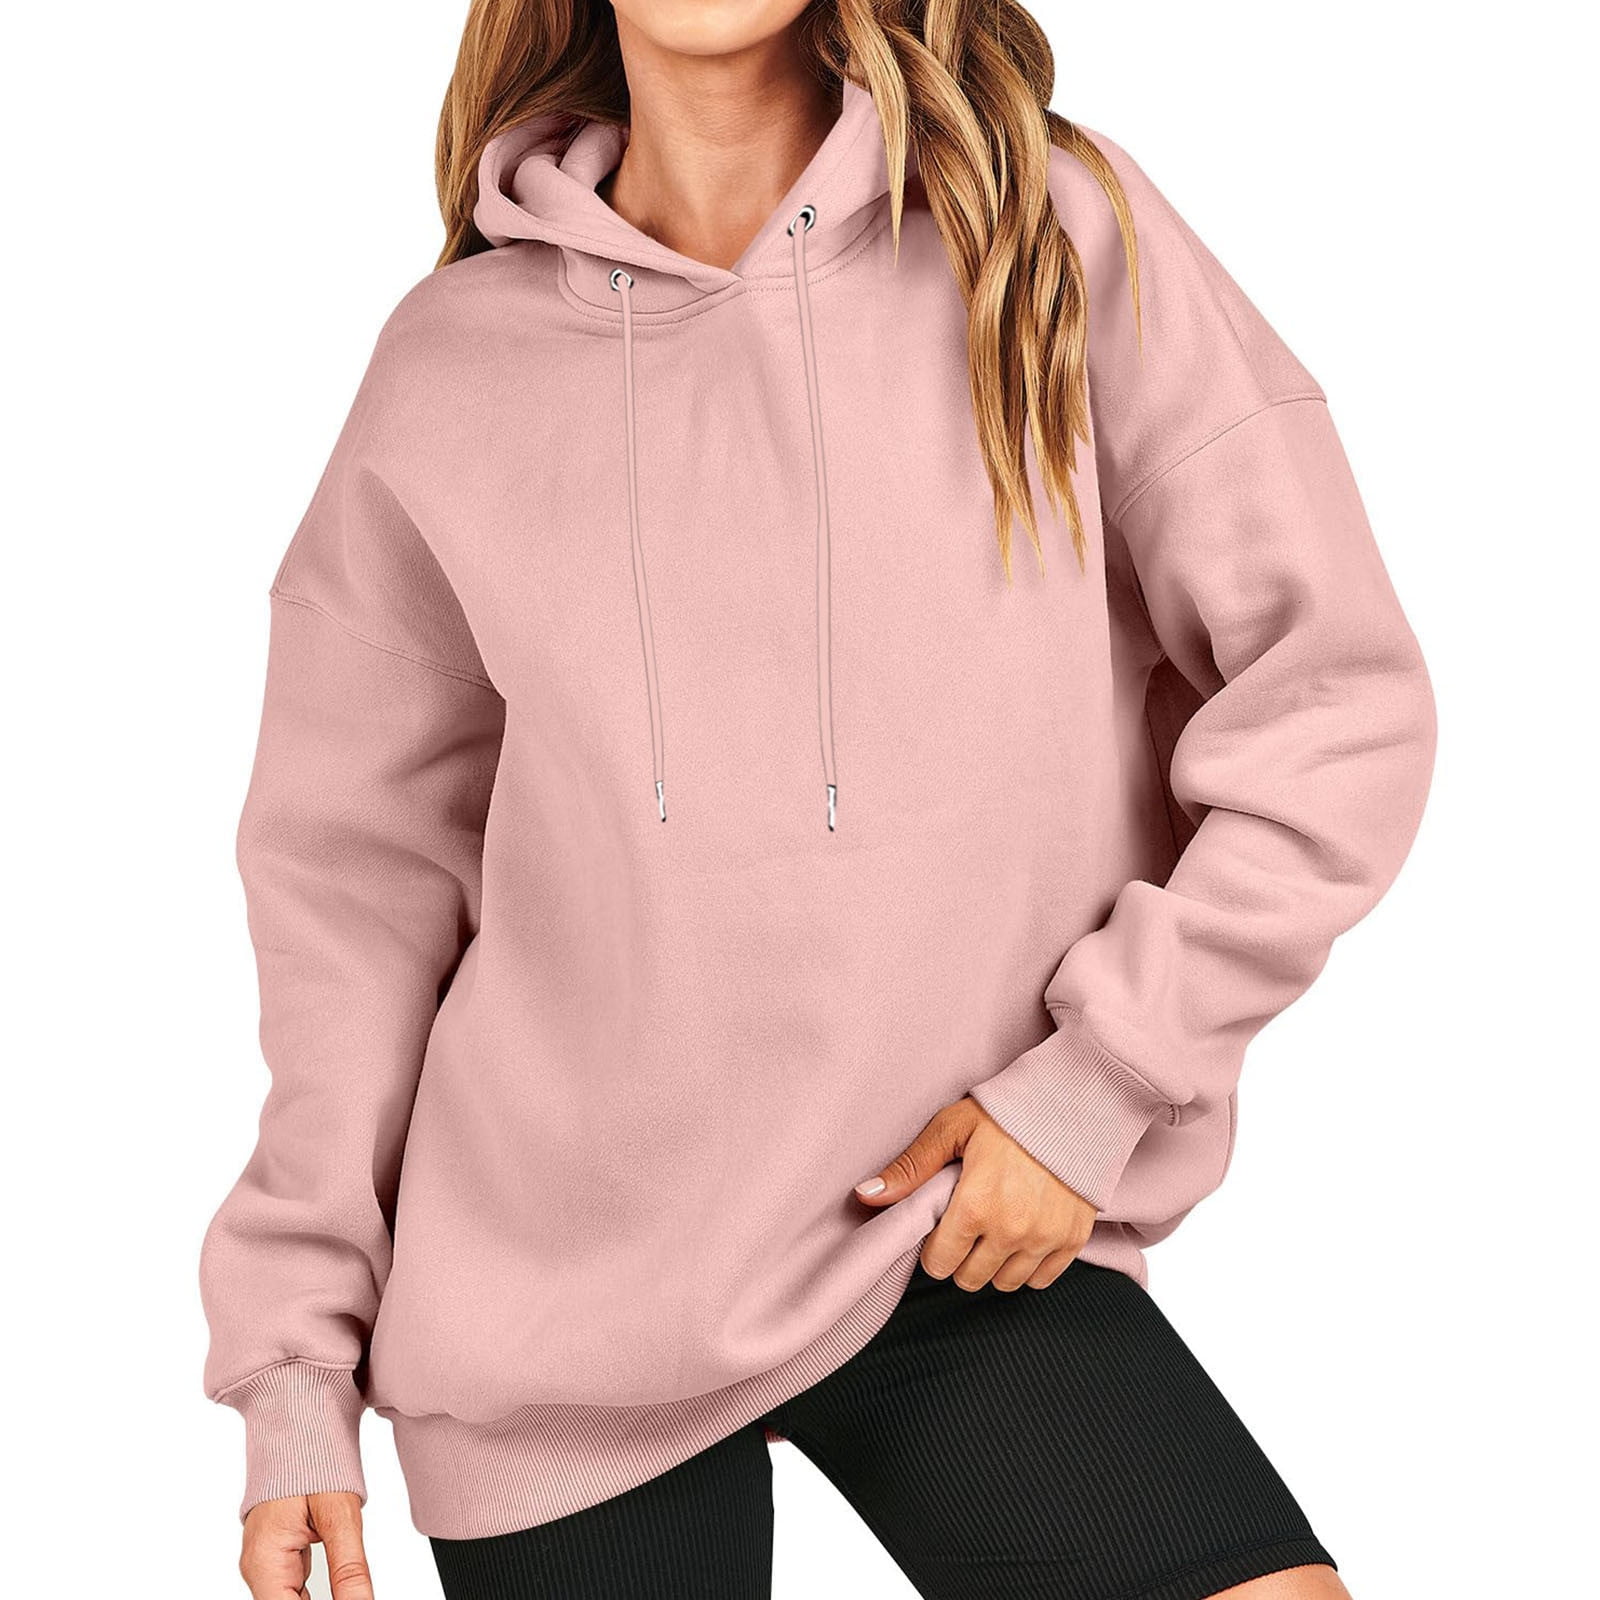 Yubnlvae Outlet Deals Overstock Clearance Womens Zip Up Sweatshirt  Oversized Hoodies Sweater Cute Casual Outfits Top 2023 at  Women's  Clothing store